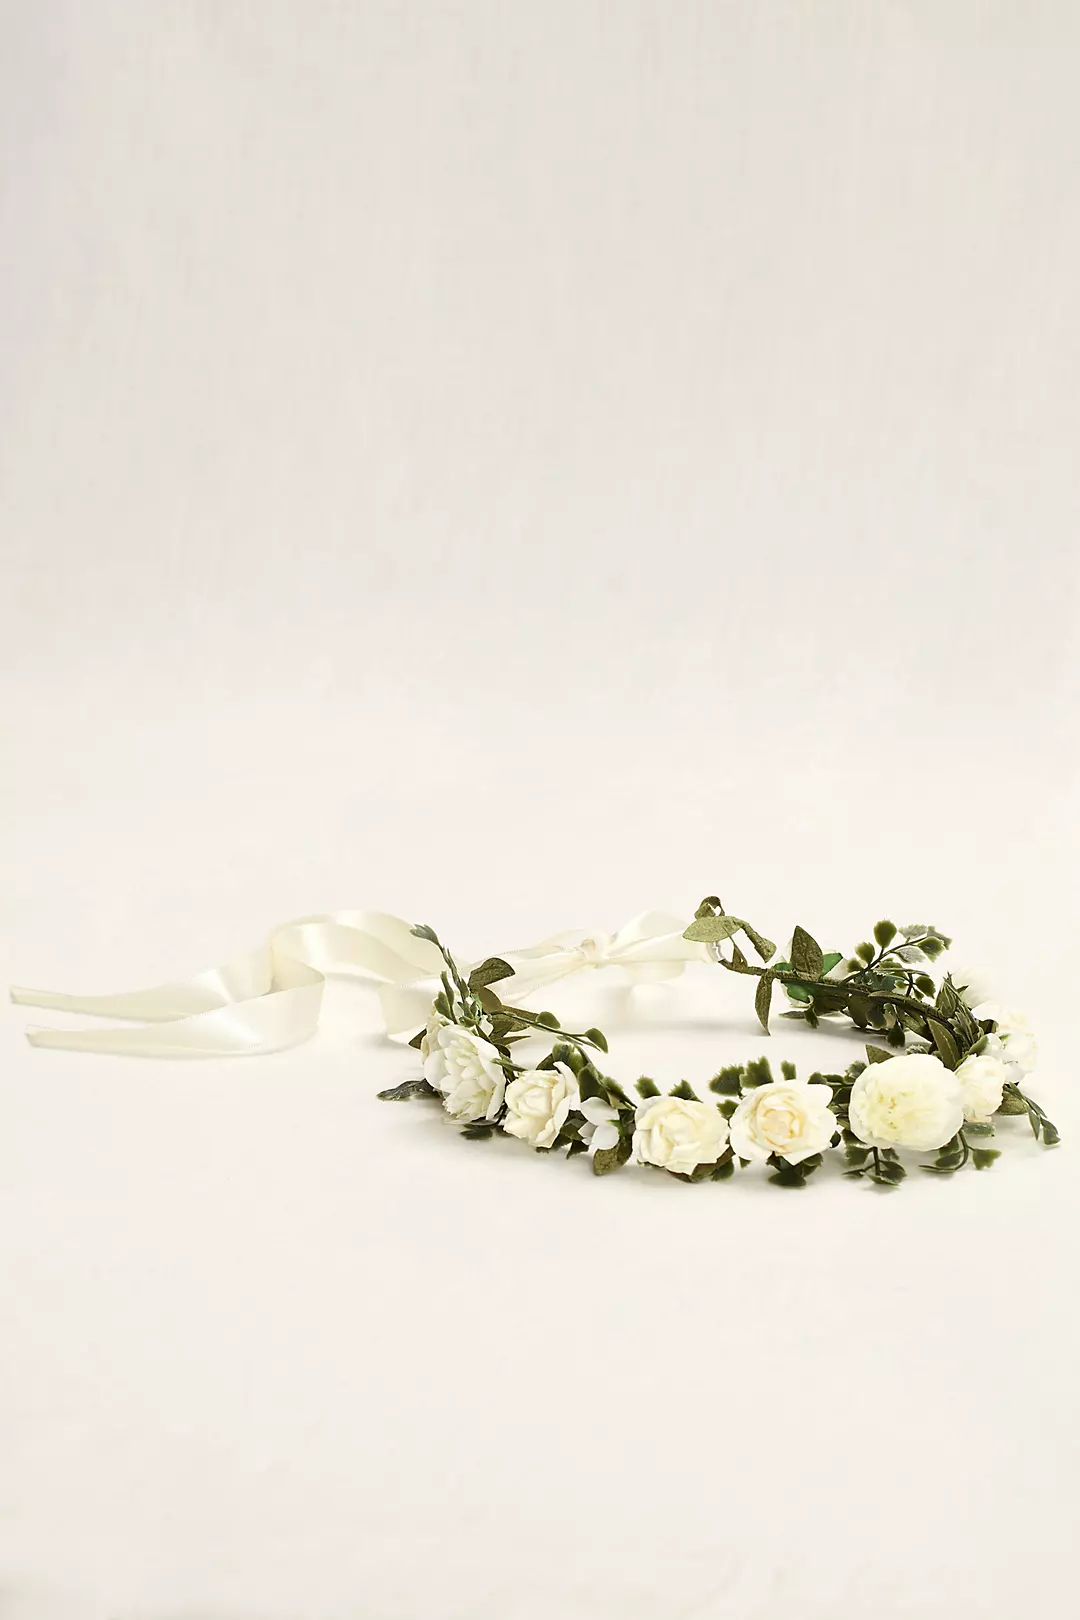 Flowers and Greenery Wreath Image